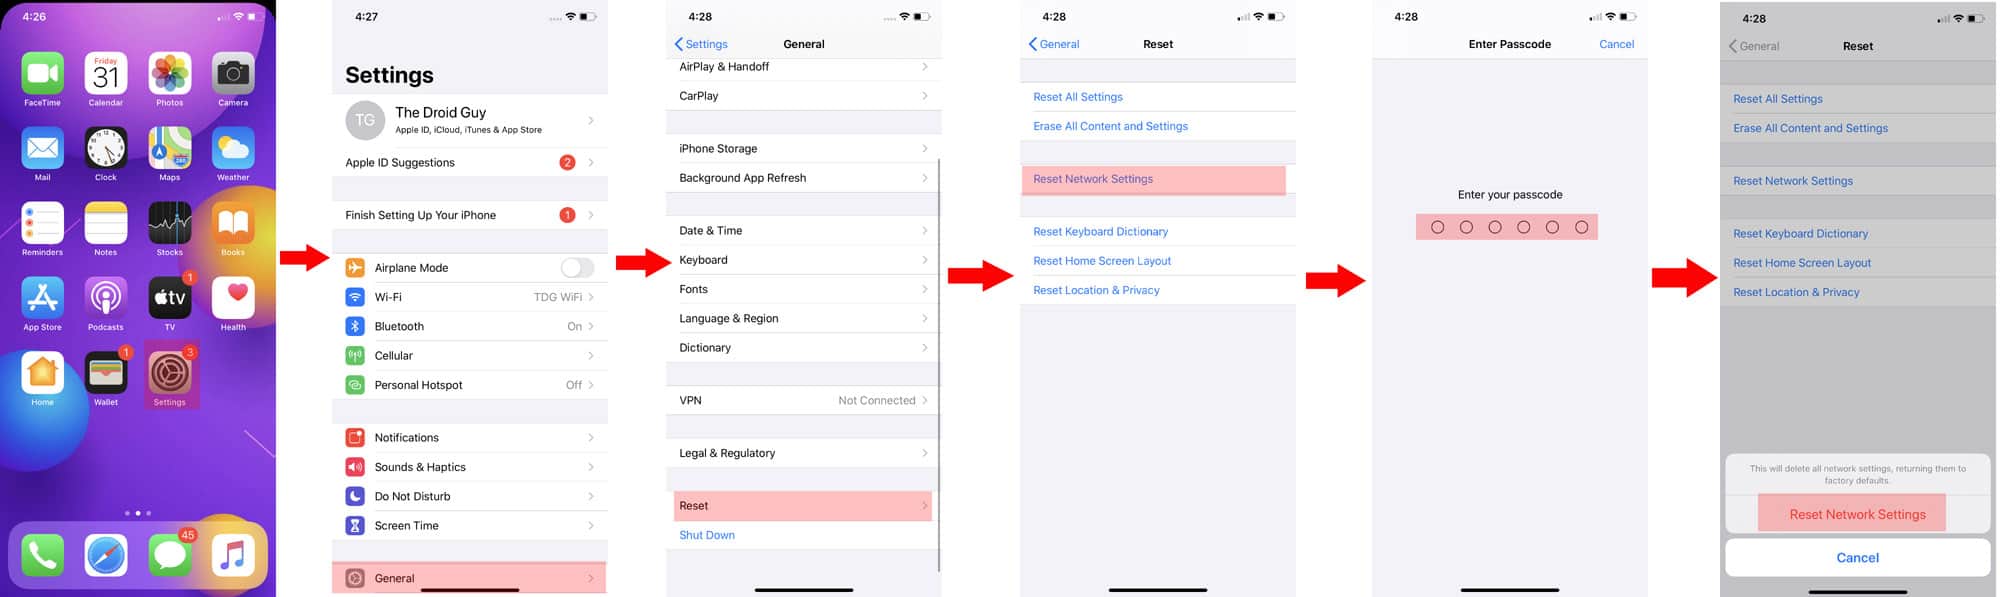 reset network settings iphone ios 13 - fix personal hotspot not working